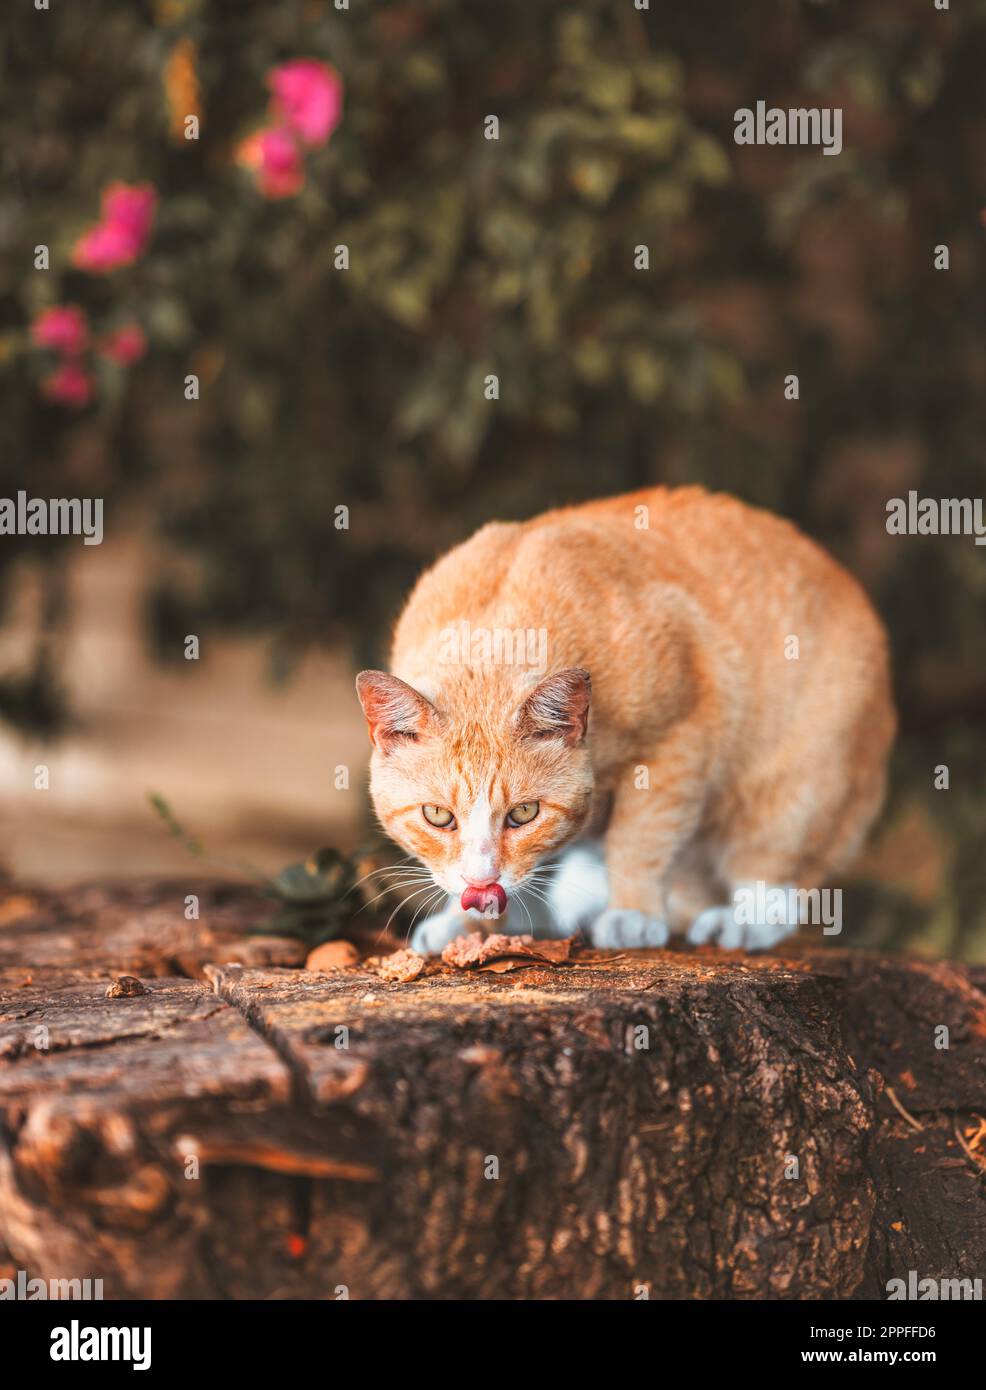 cat in the garden eating with tongue out Stock Photo